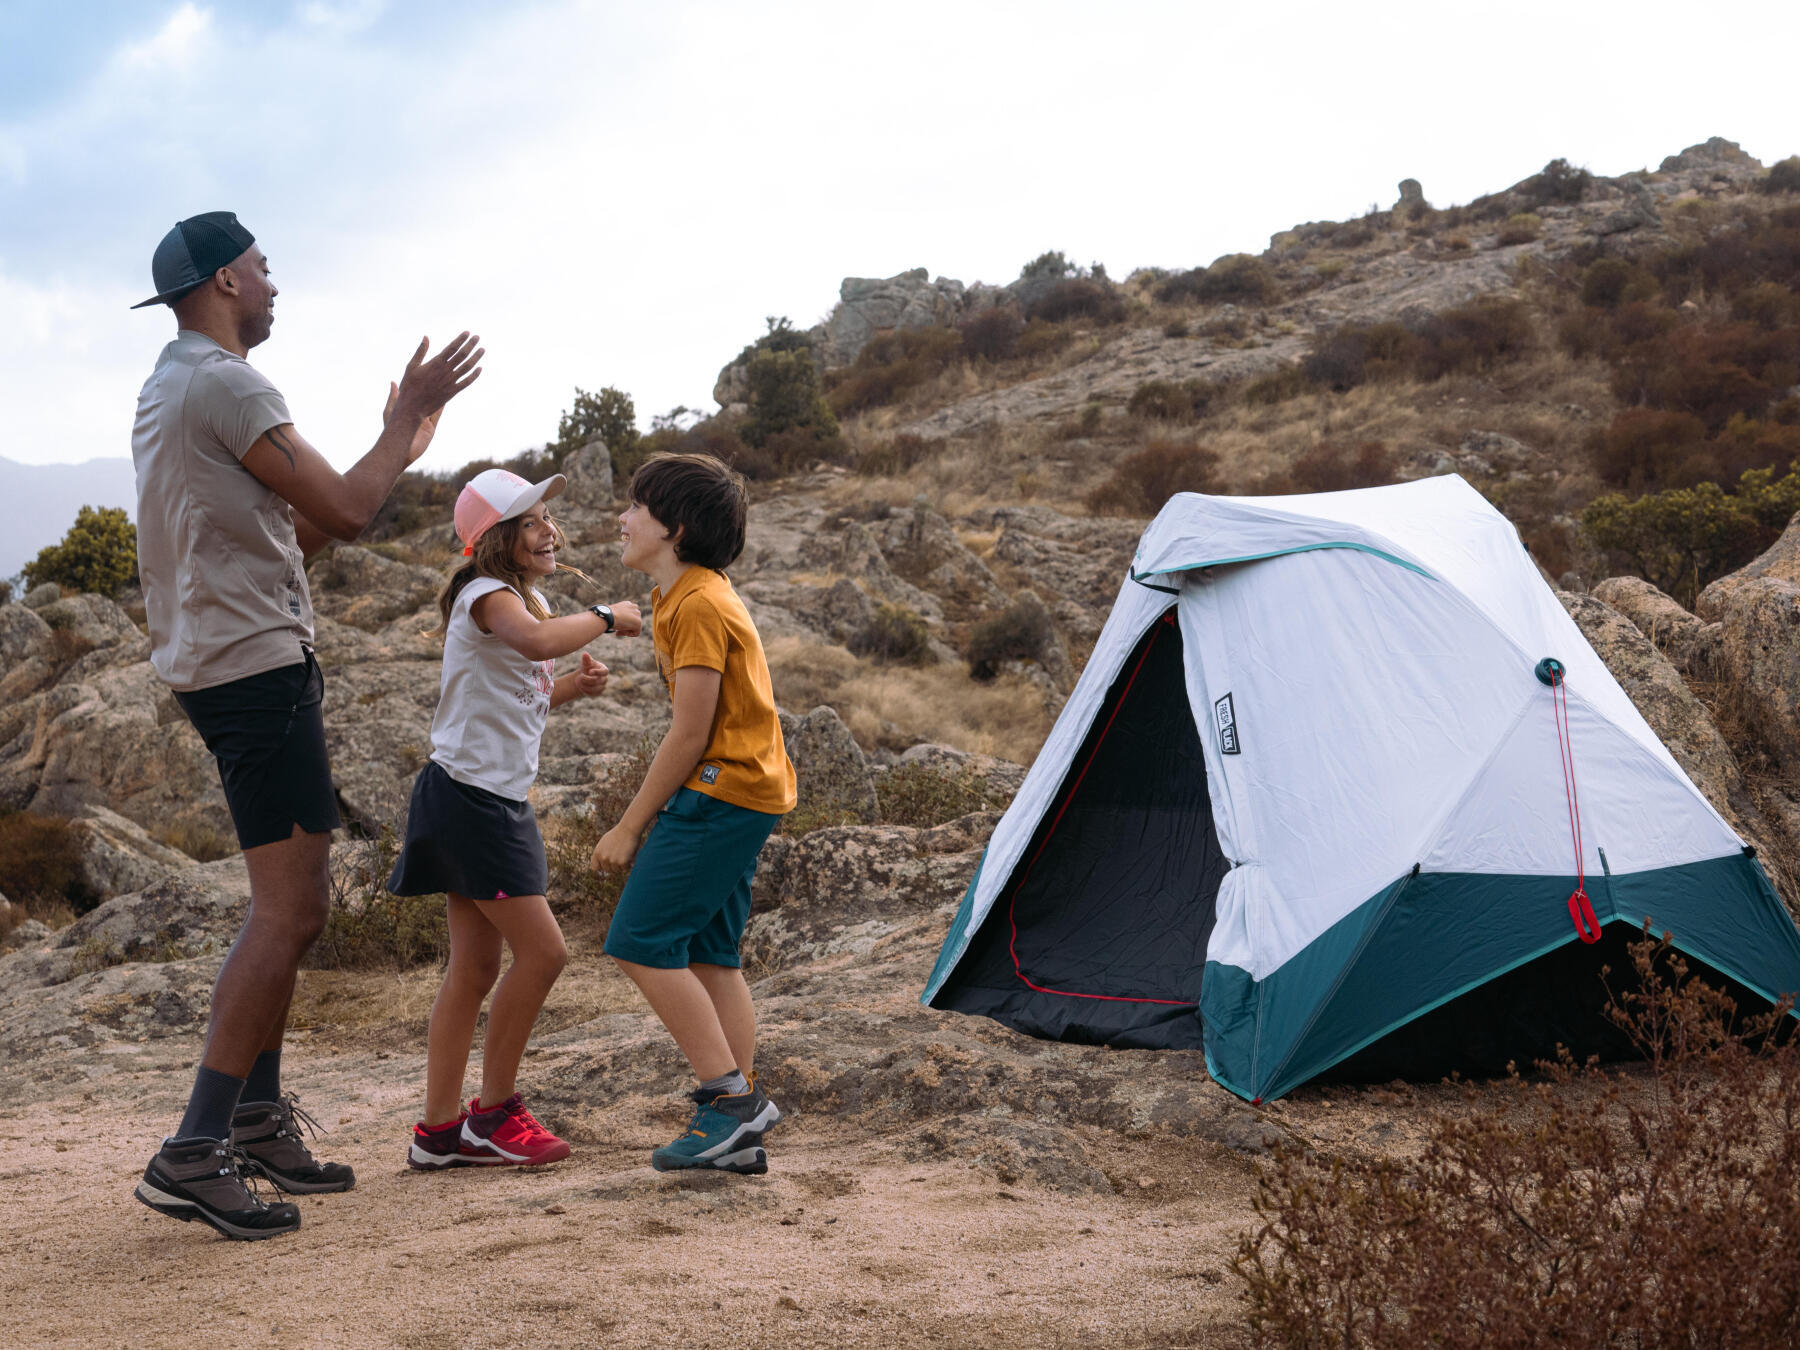 What tent should you choose for 4 people?